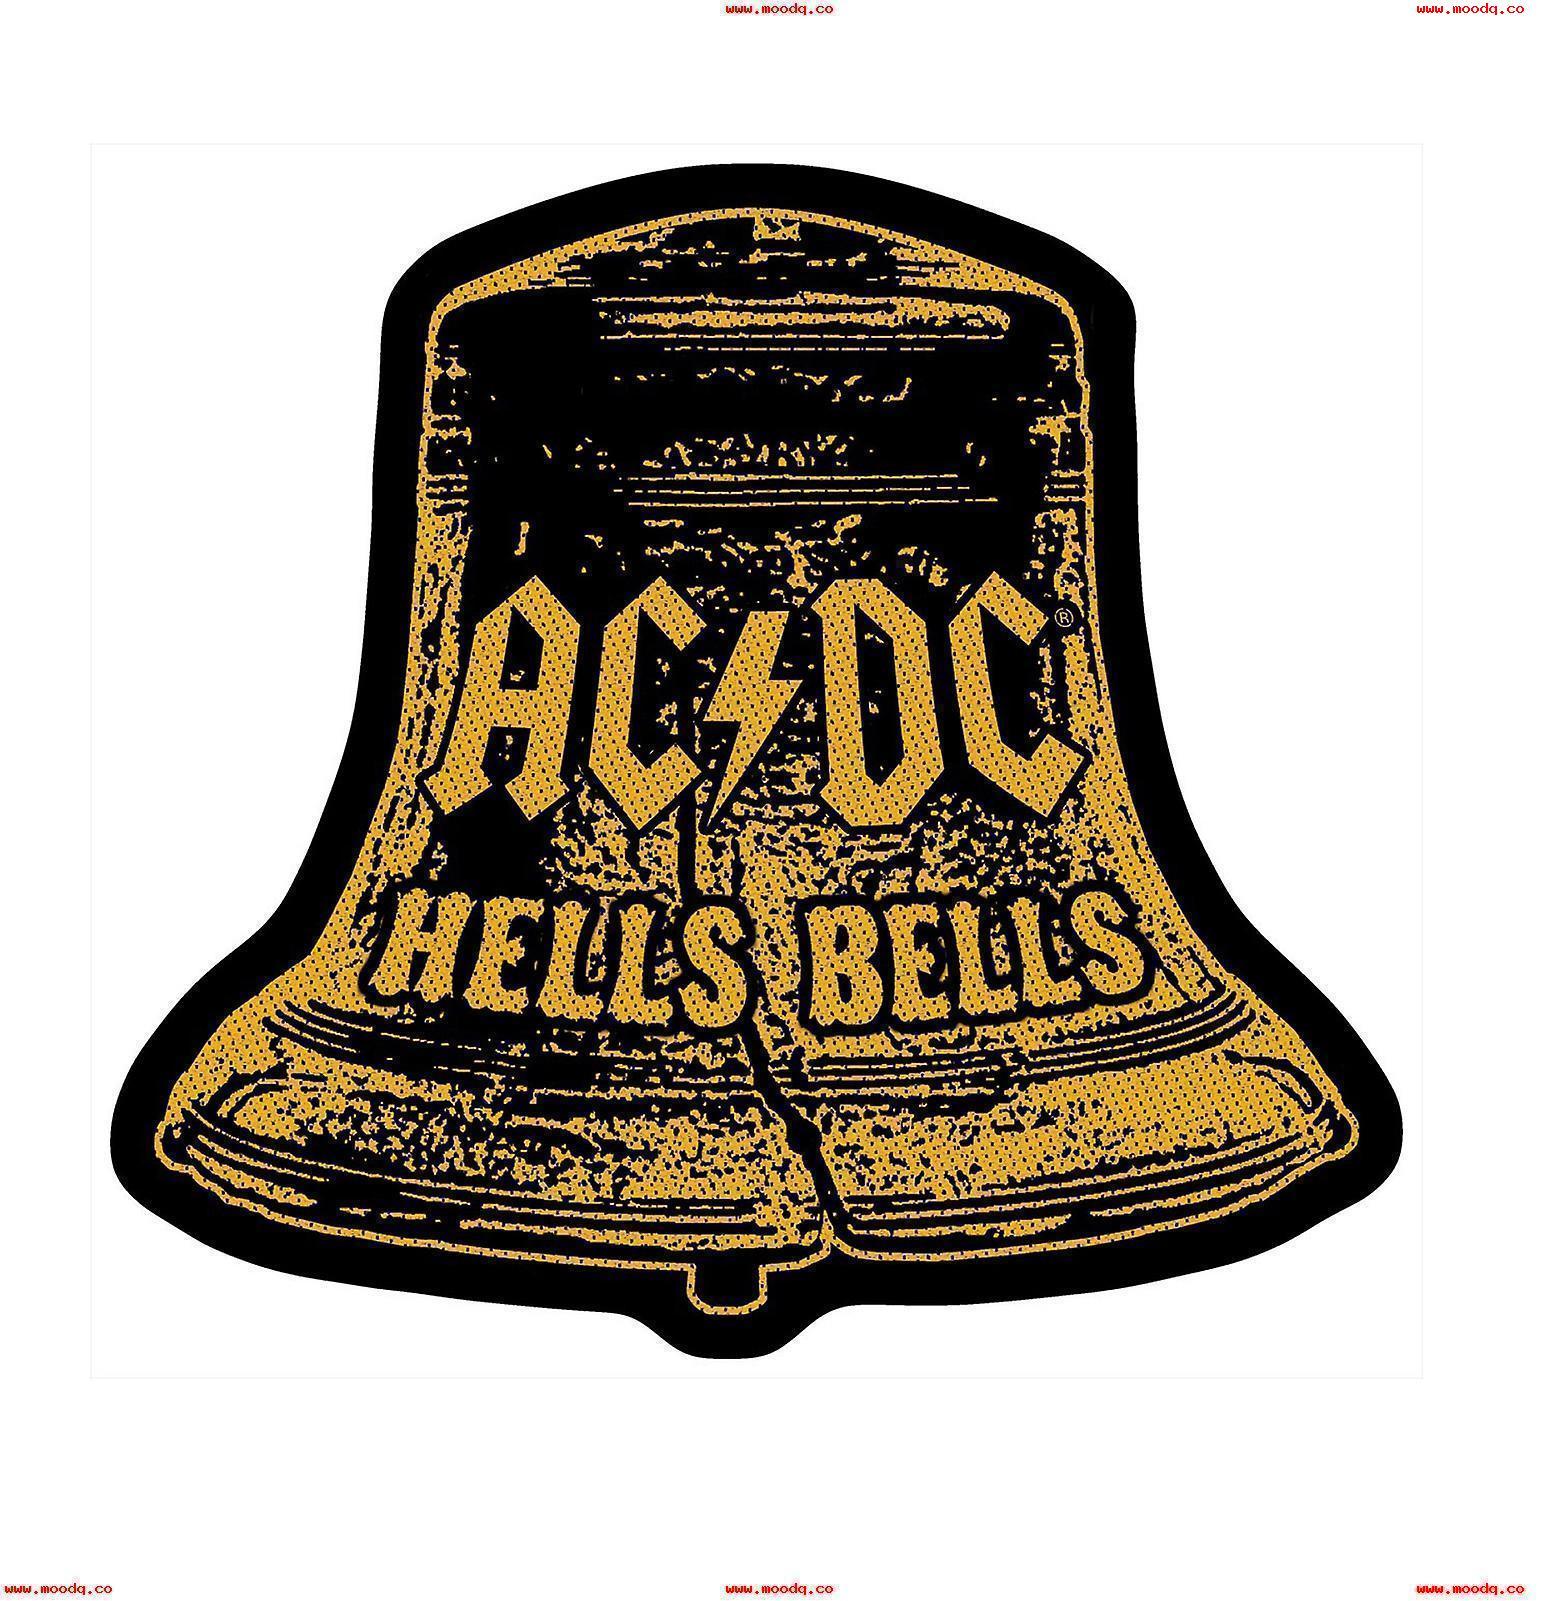 Official AC DC Logo - AC/DC Hells Bells Distressed Logo Official New Black Woven Cut Out ...